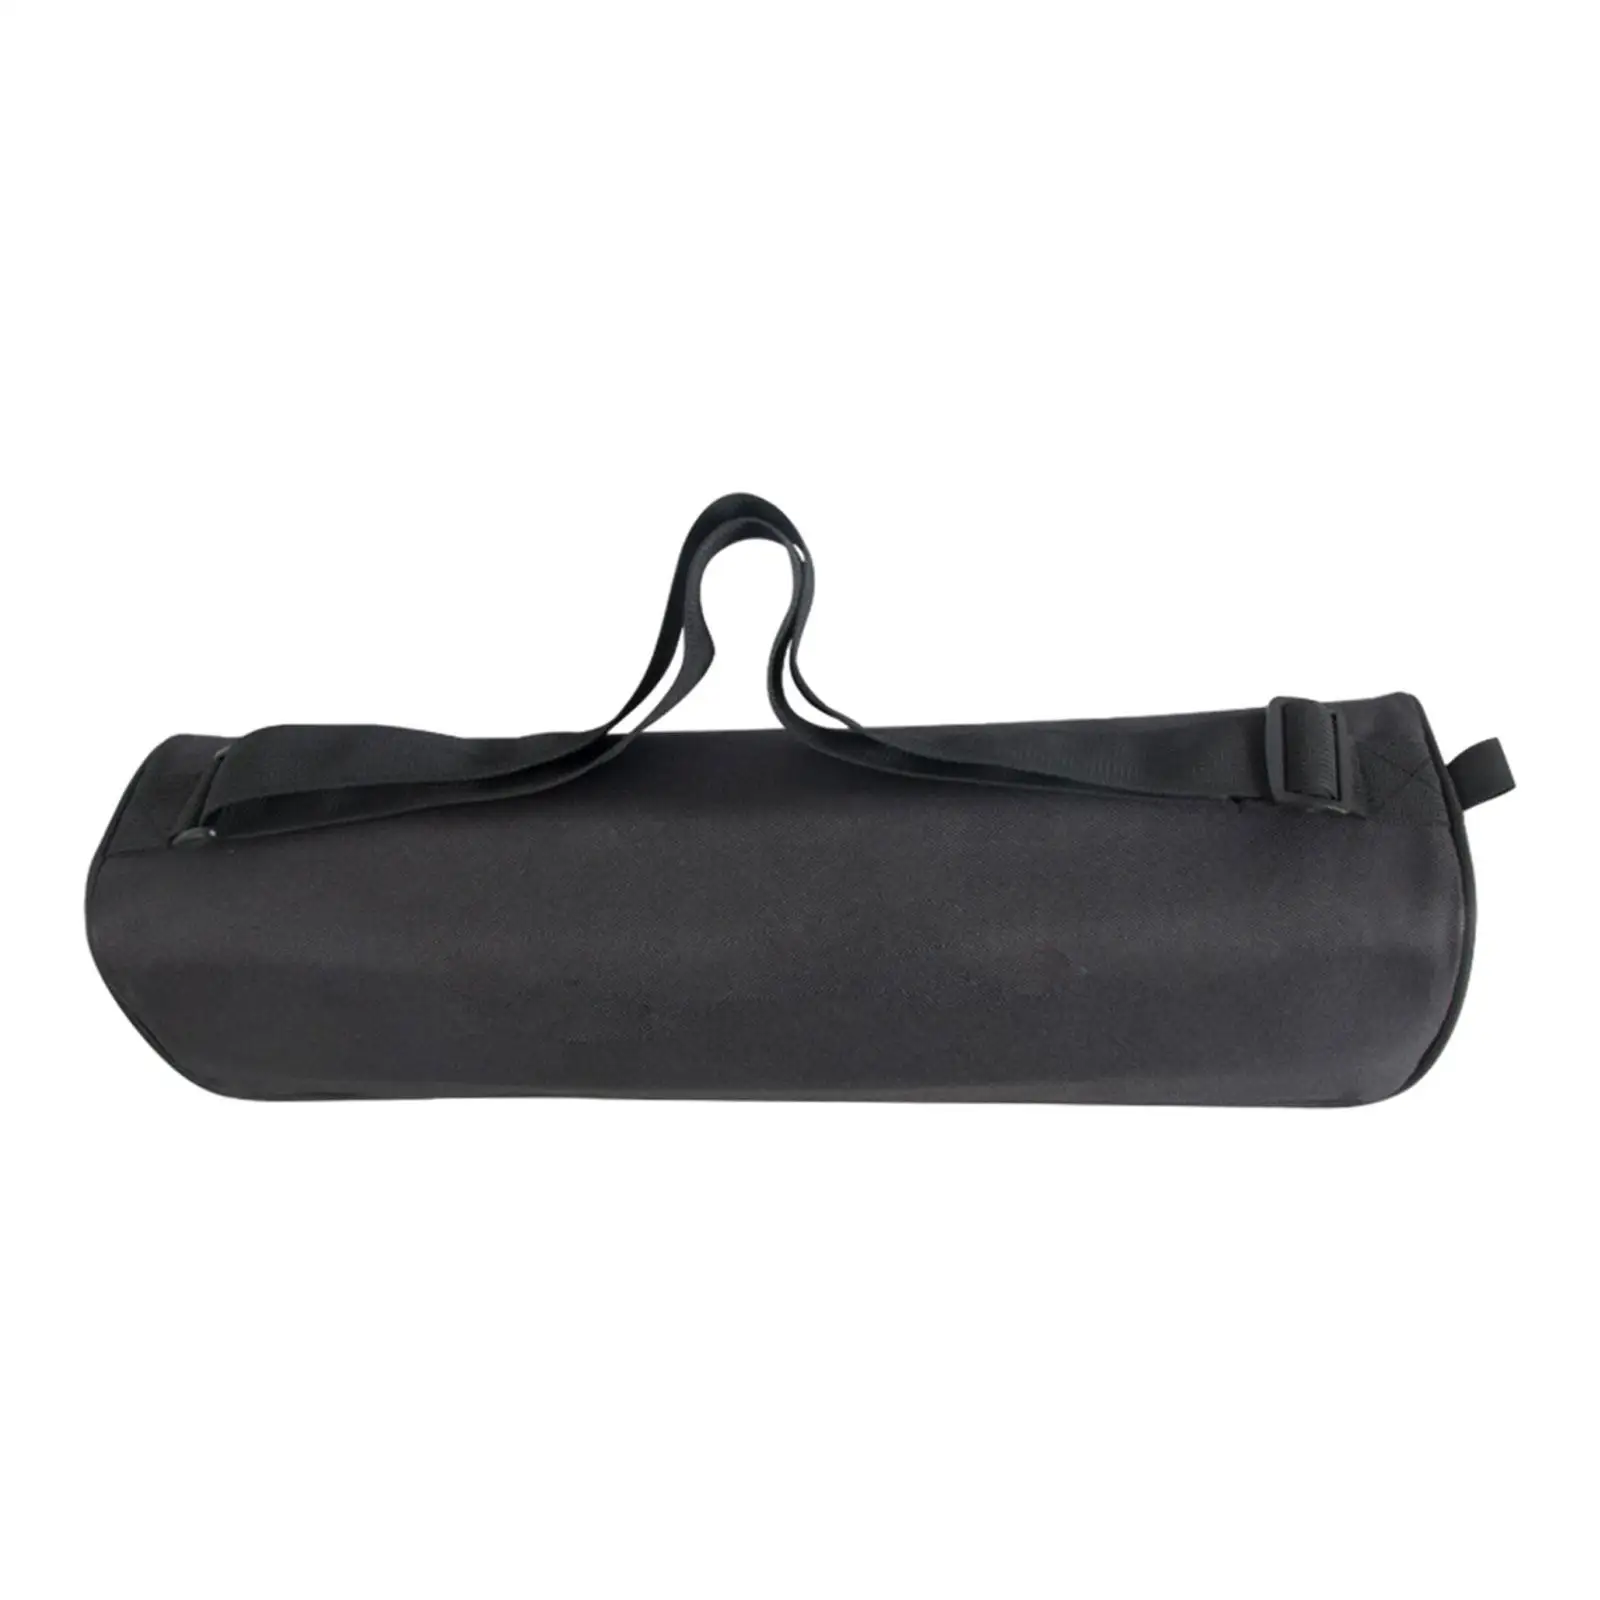 Tripod Carrying Case Multifunctional Photography Accessories Nylon Storage Bag for Monopod Umbrella Speakers Tent Pole Mic Stand